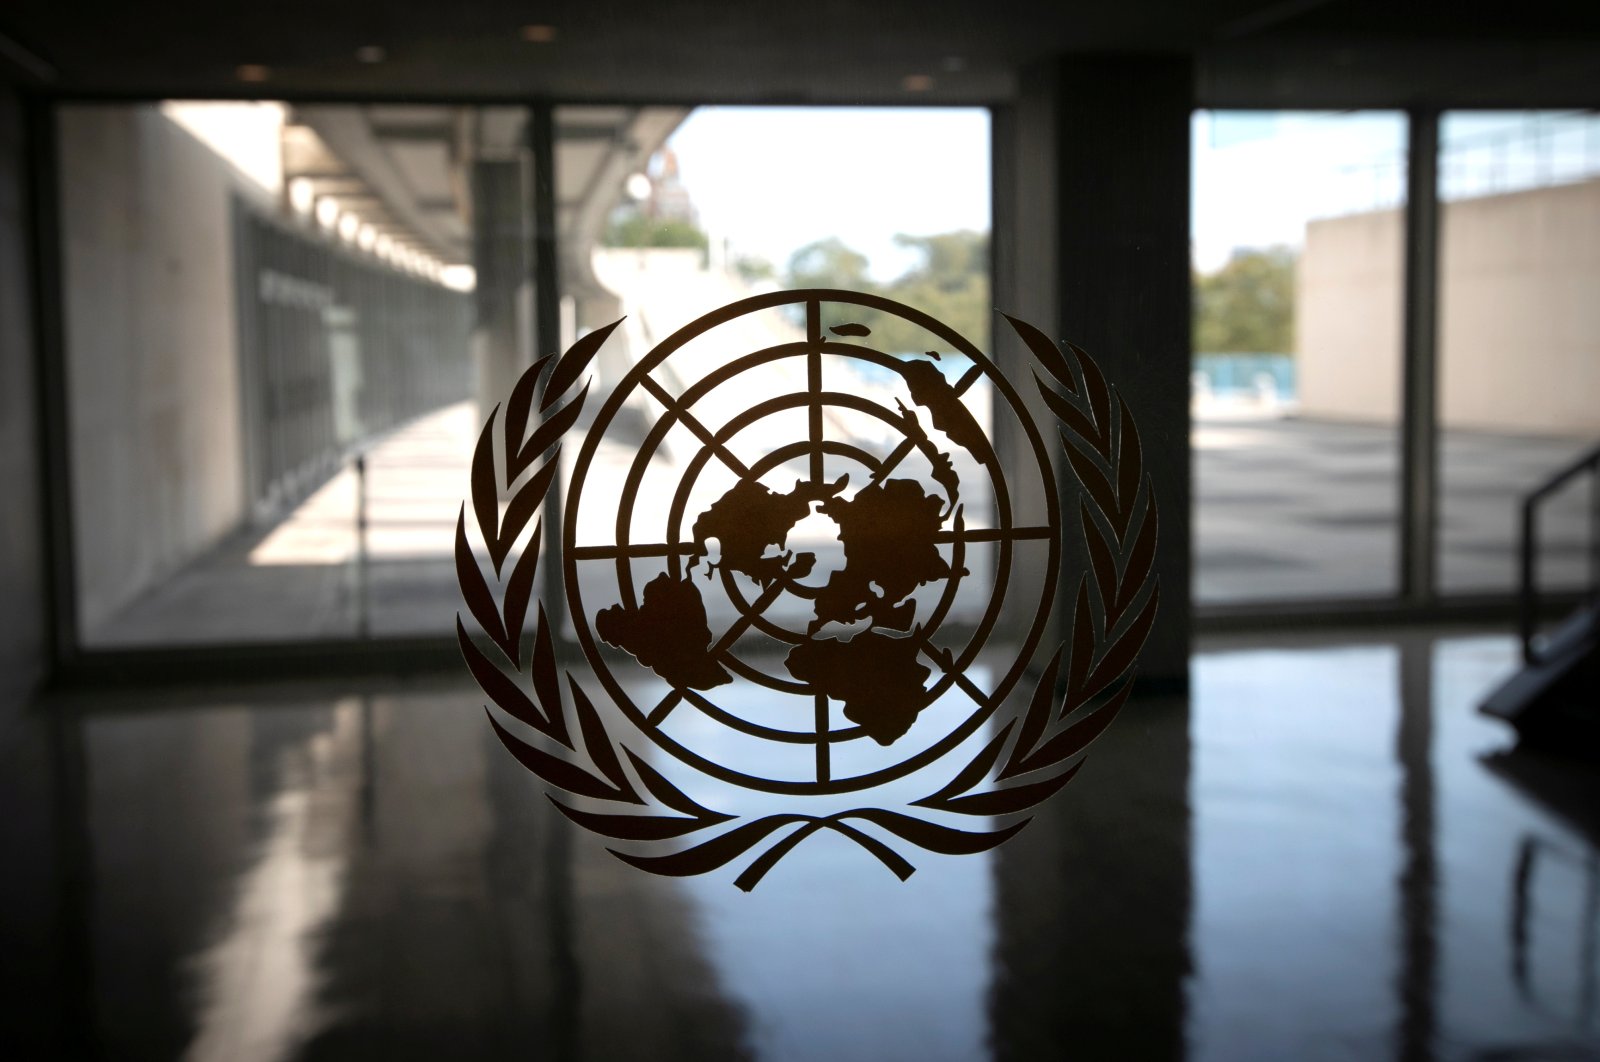 The United Nations logo is seen on a window in an empty hallway at U.N. headquarters in New York, U.S., Sept. 21, 2020. (REUTERS Photo)